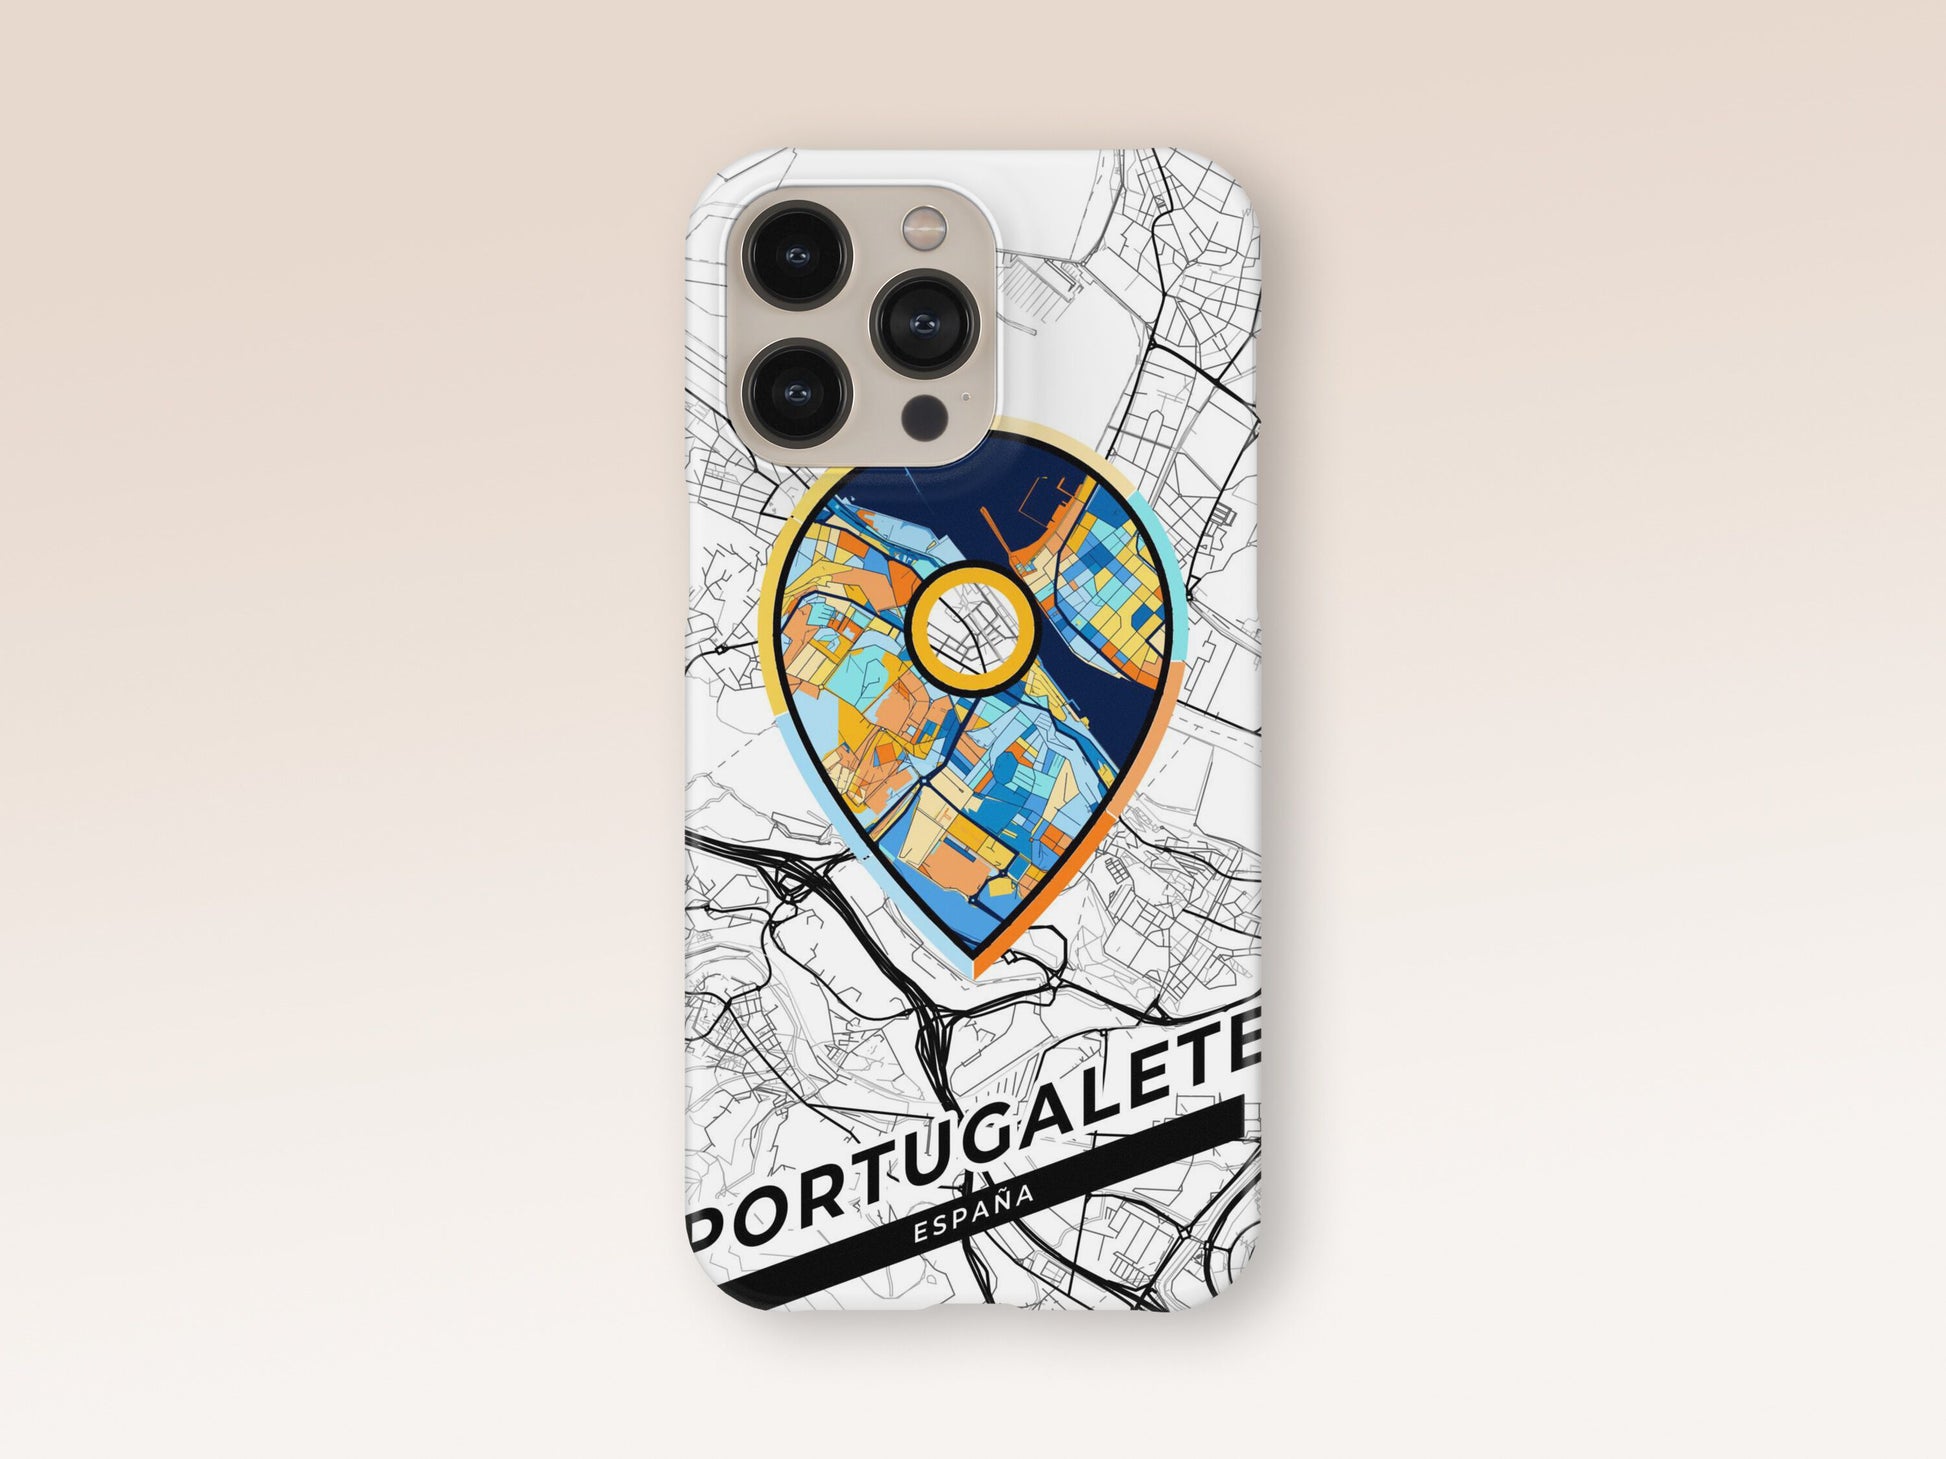 Portugalete Spain slim phone case with colorful icon. Birthday, wedding or housewarming gift. Couple match cases. 1